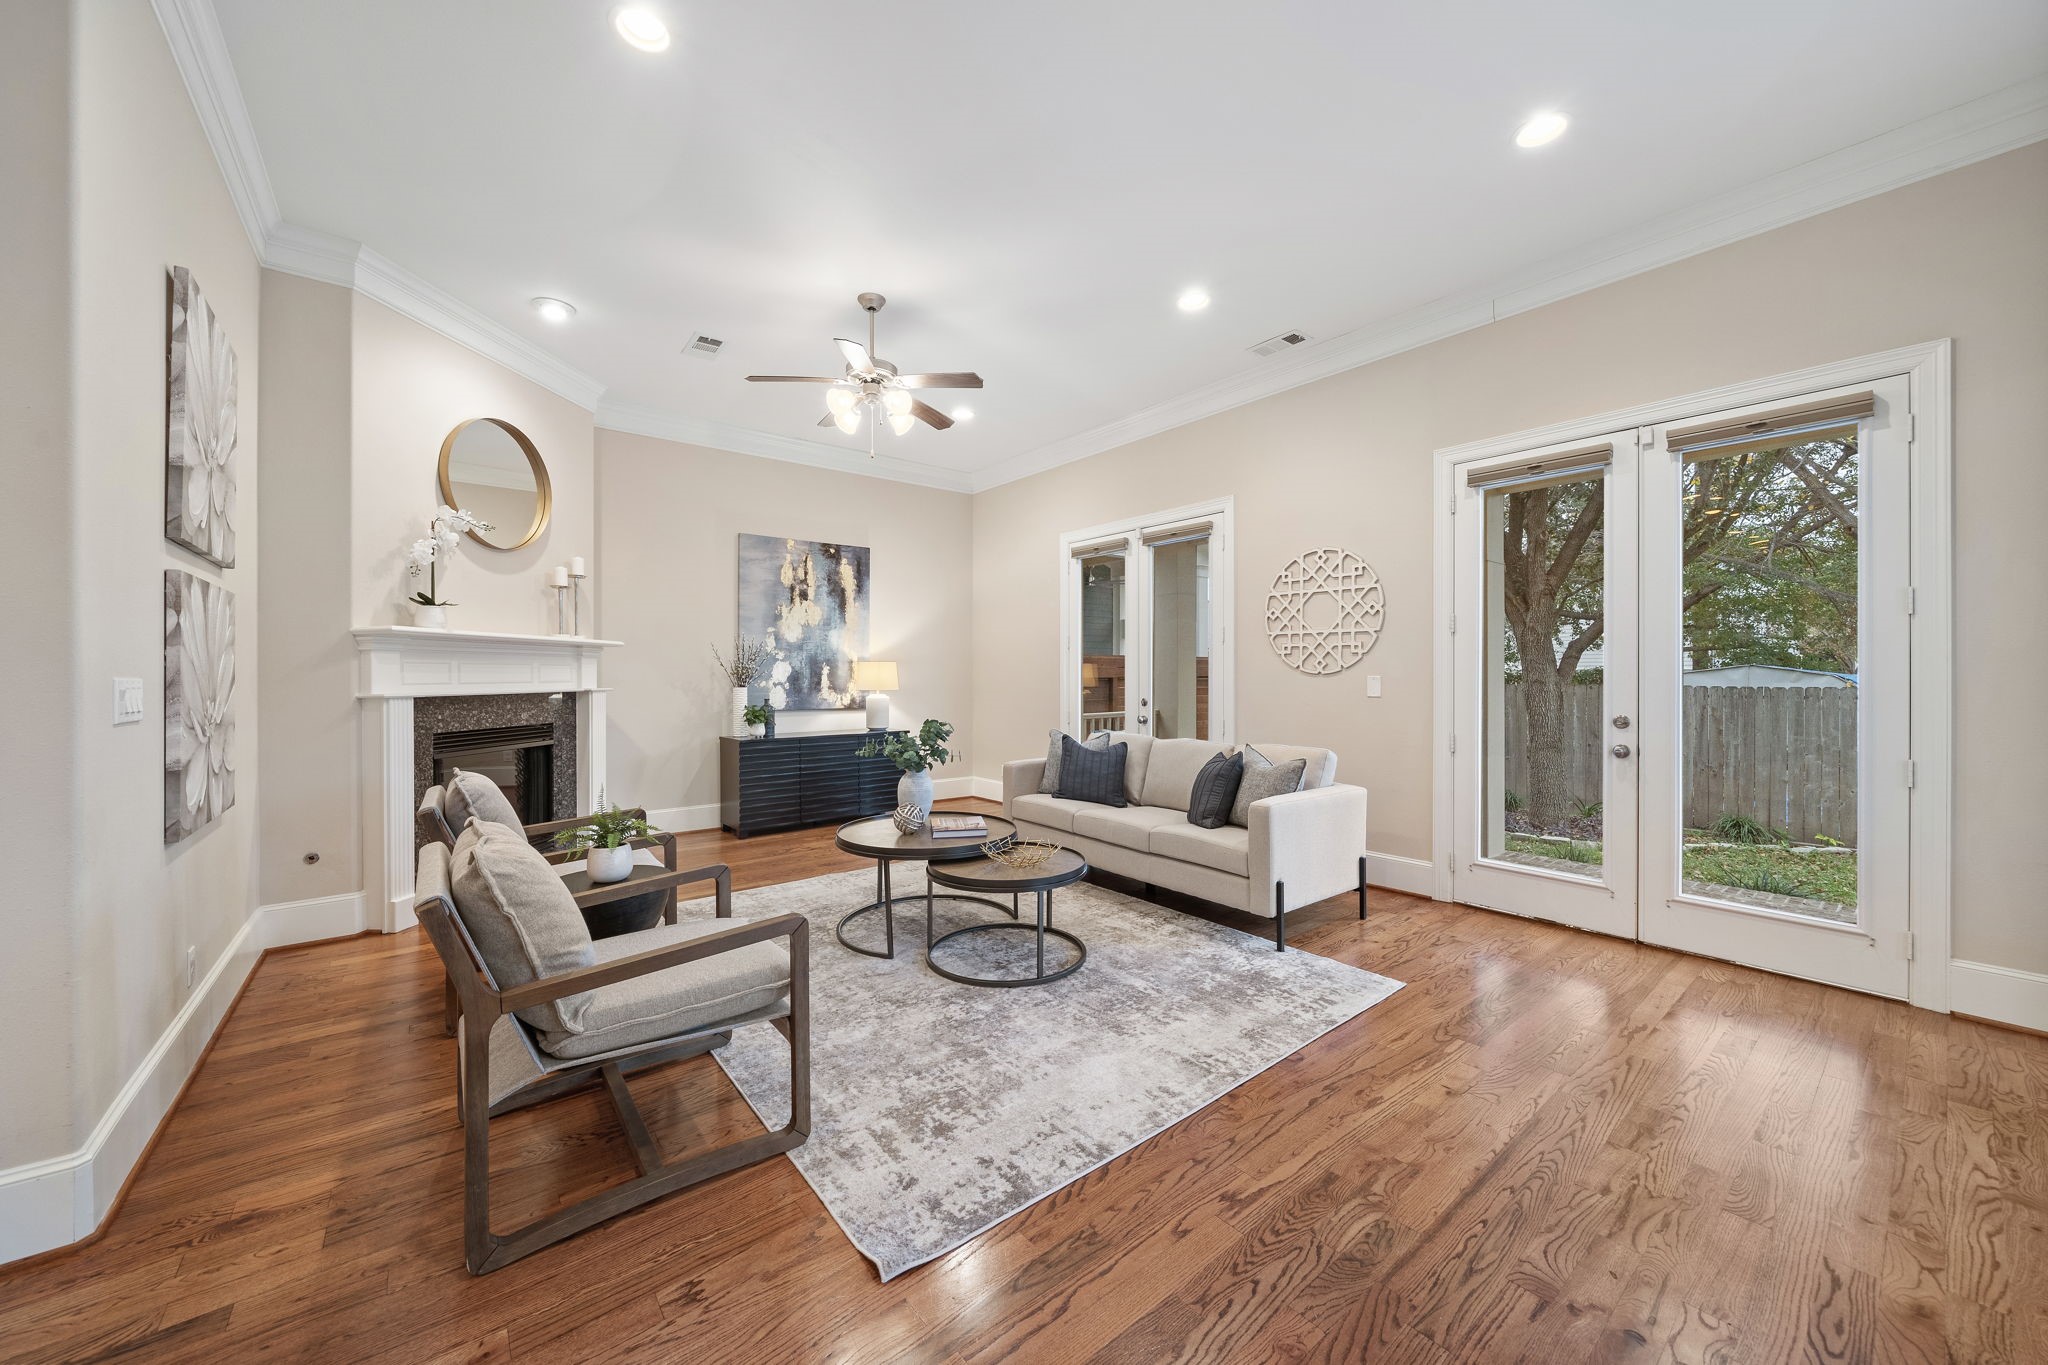 Leave guests in awe as they gather in the living room flaunting a stately gas log fireplace, high ceilings, abundant floor space, and convenient access to the private backyard.